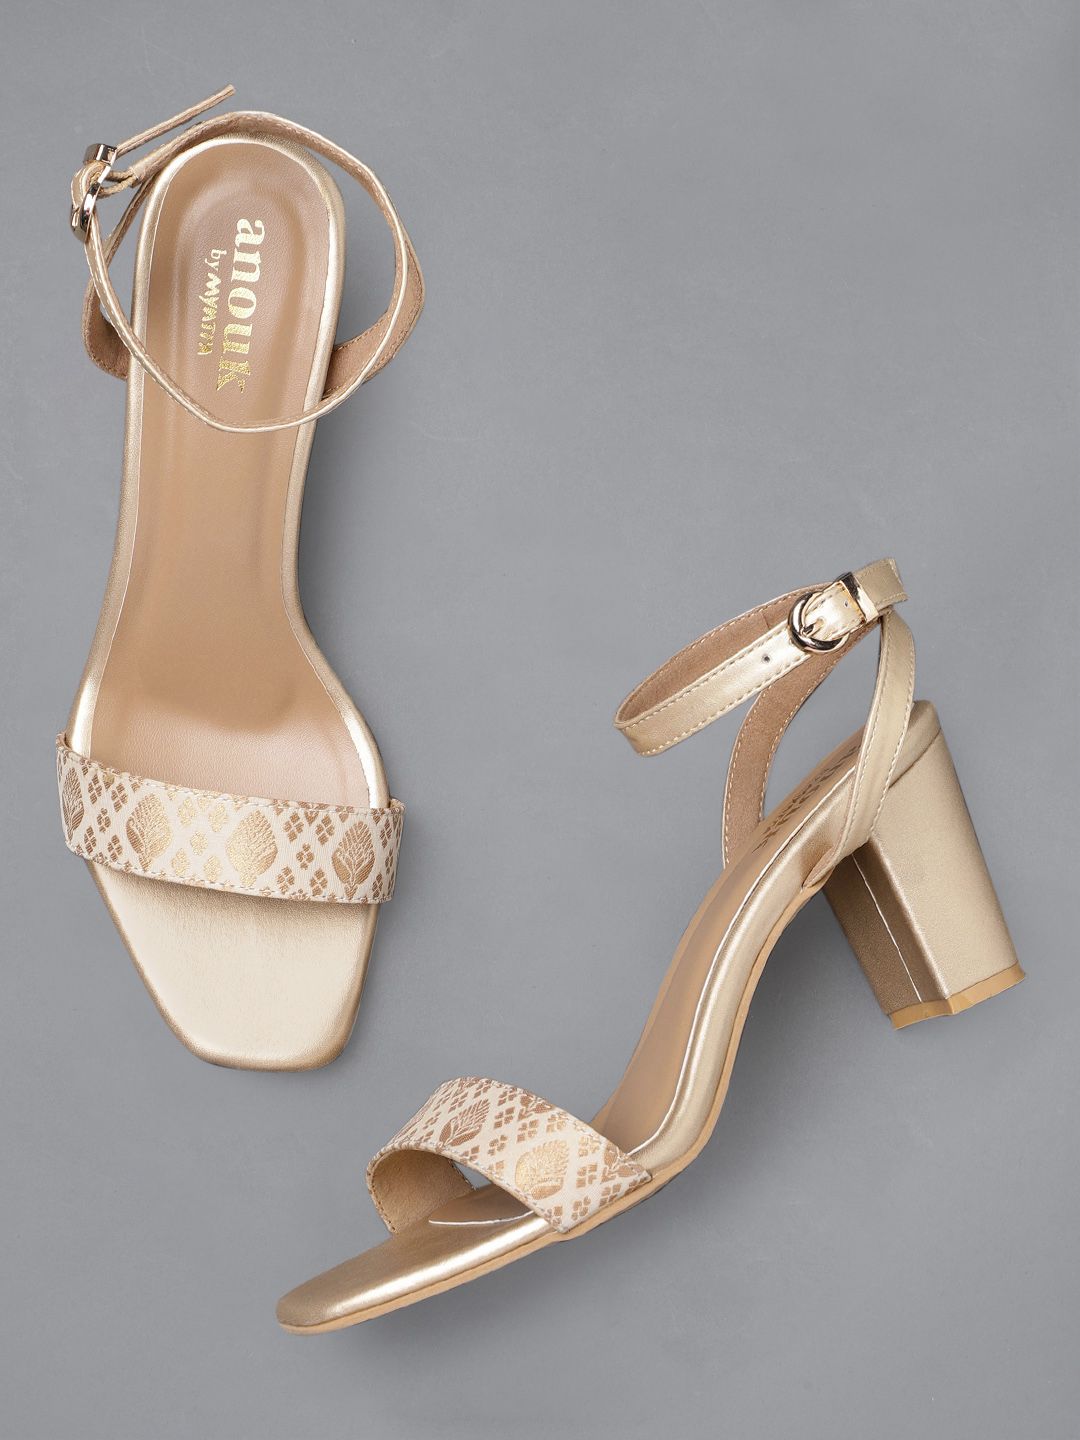 Anouk Women Gold-Toned & Off-White Woven Design Sandals Price in India